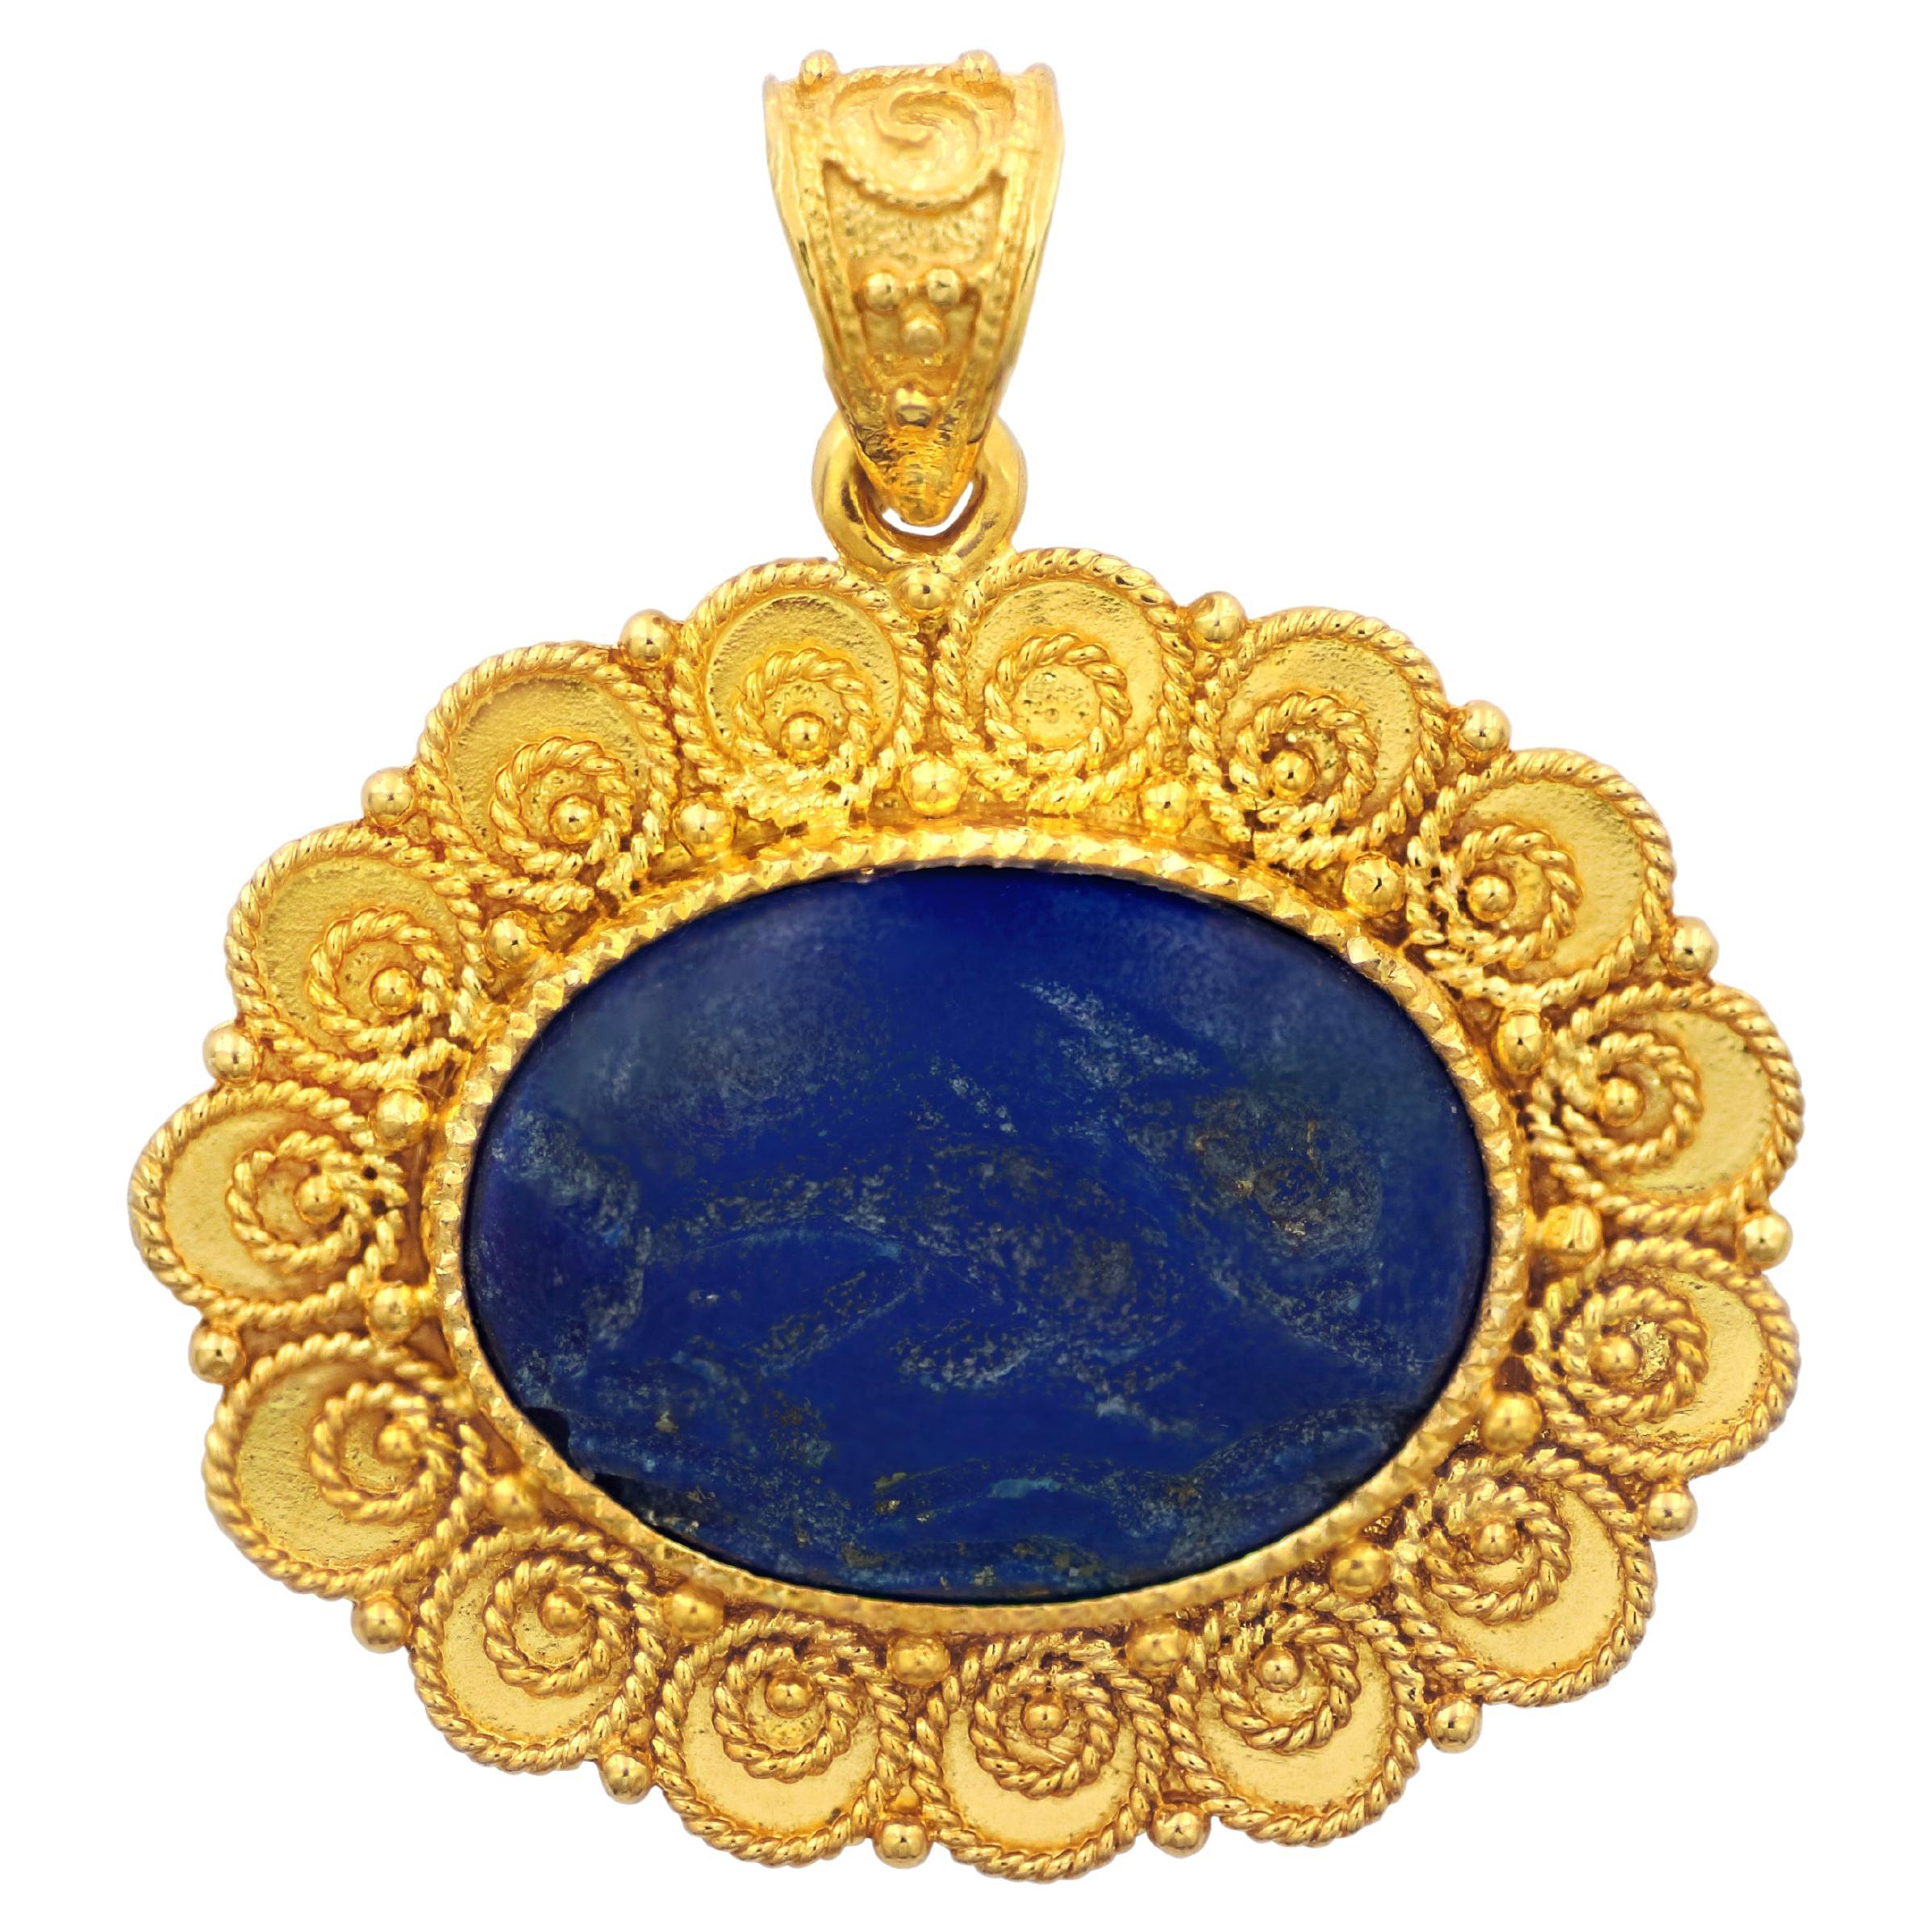 Dimos 18k Gold Lapis Lazuli Pendant with Carved Dolphins